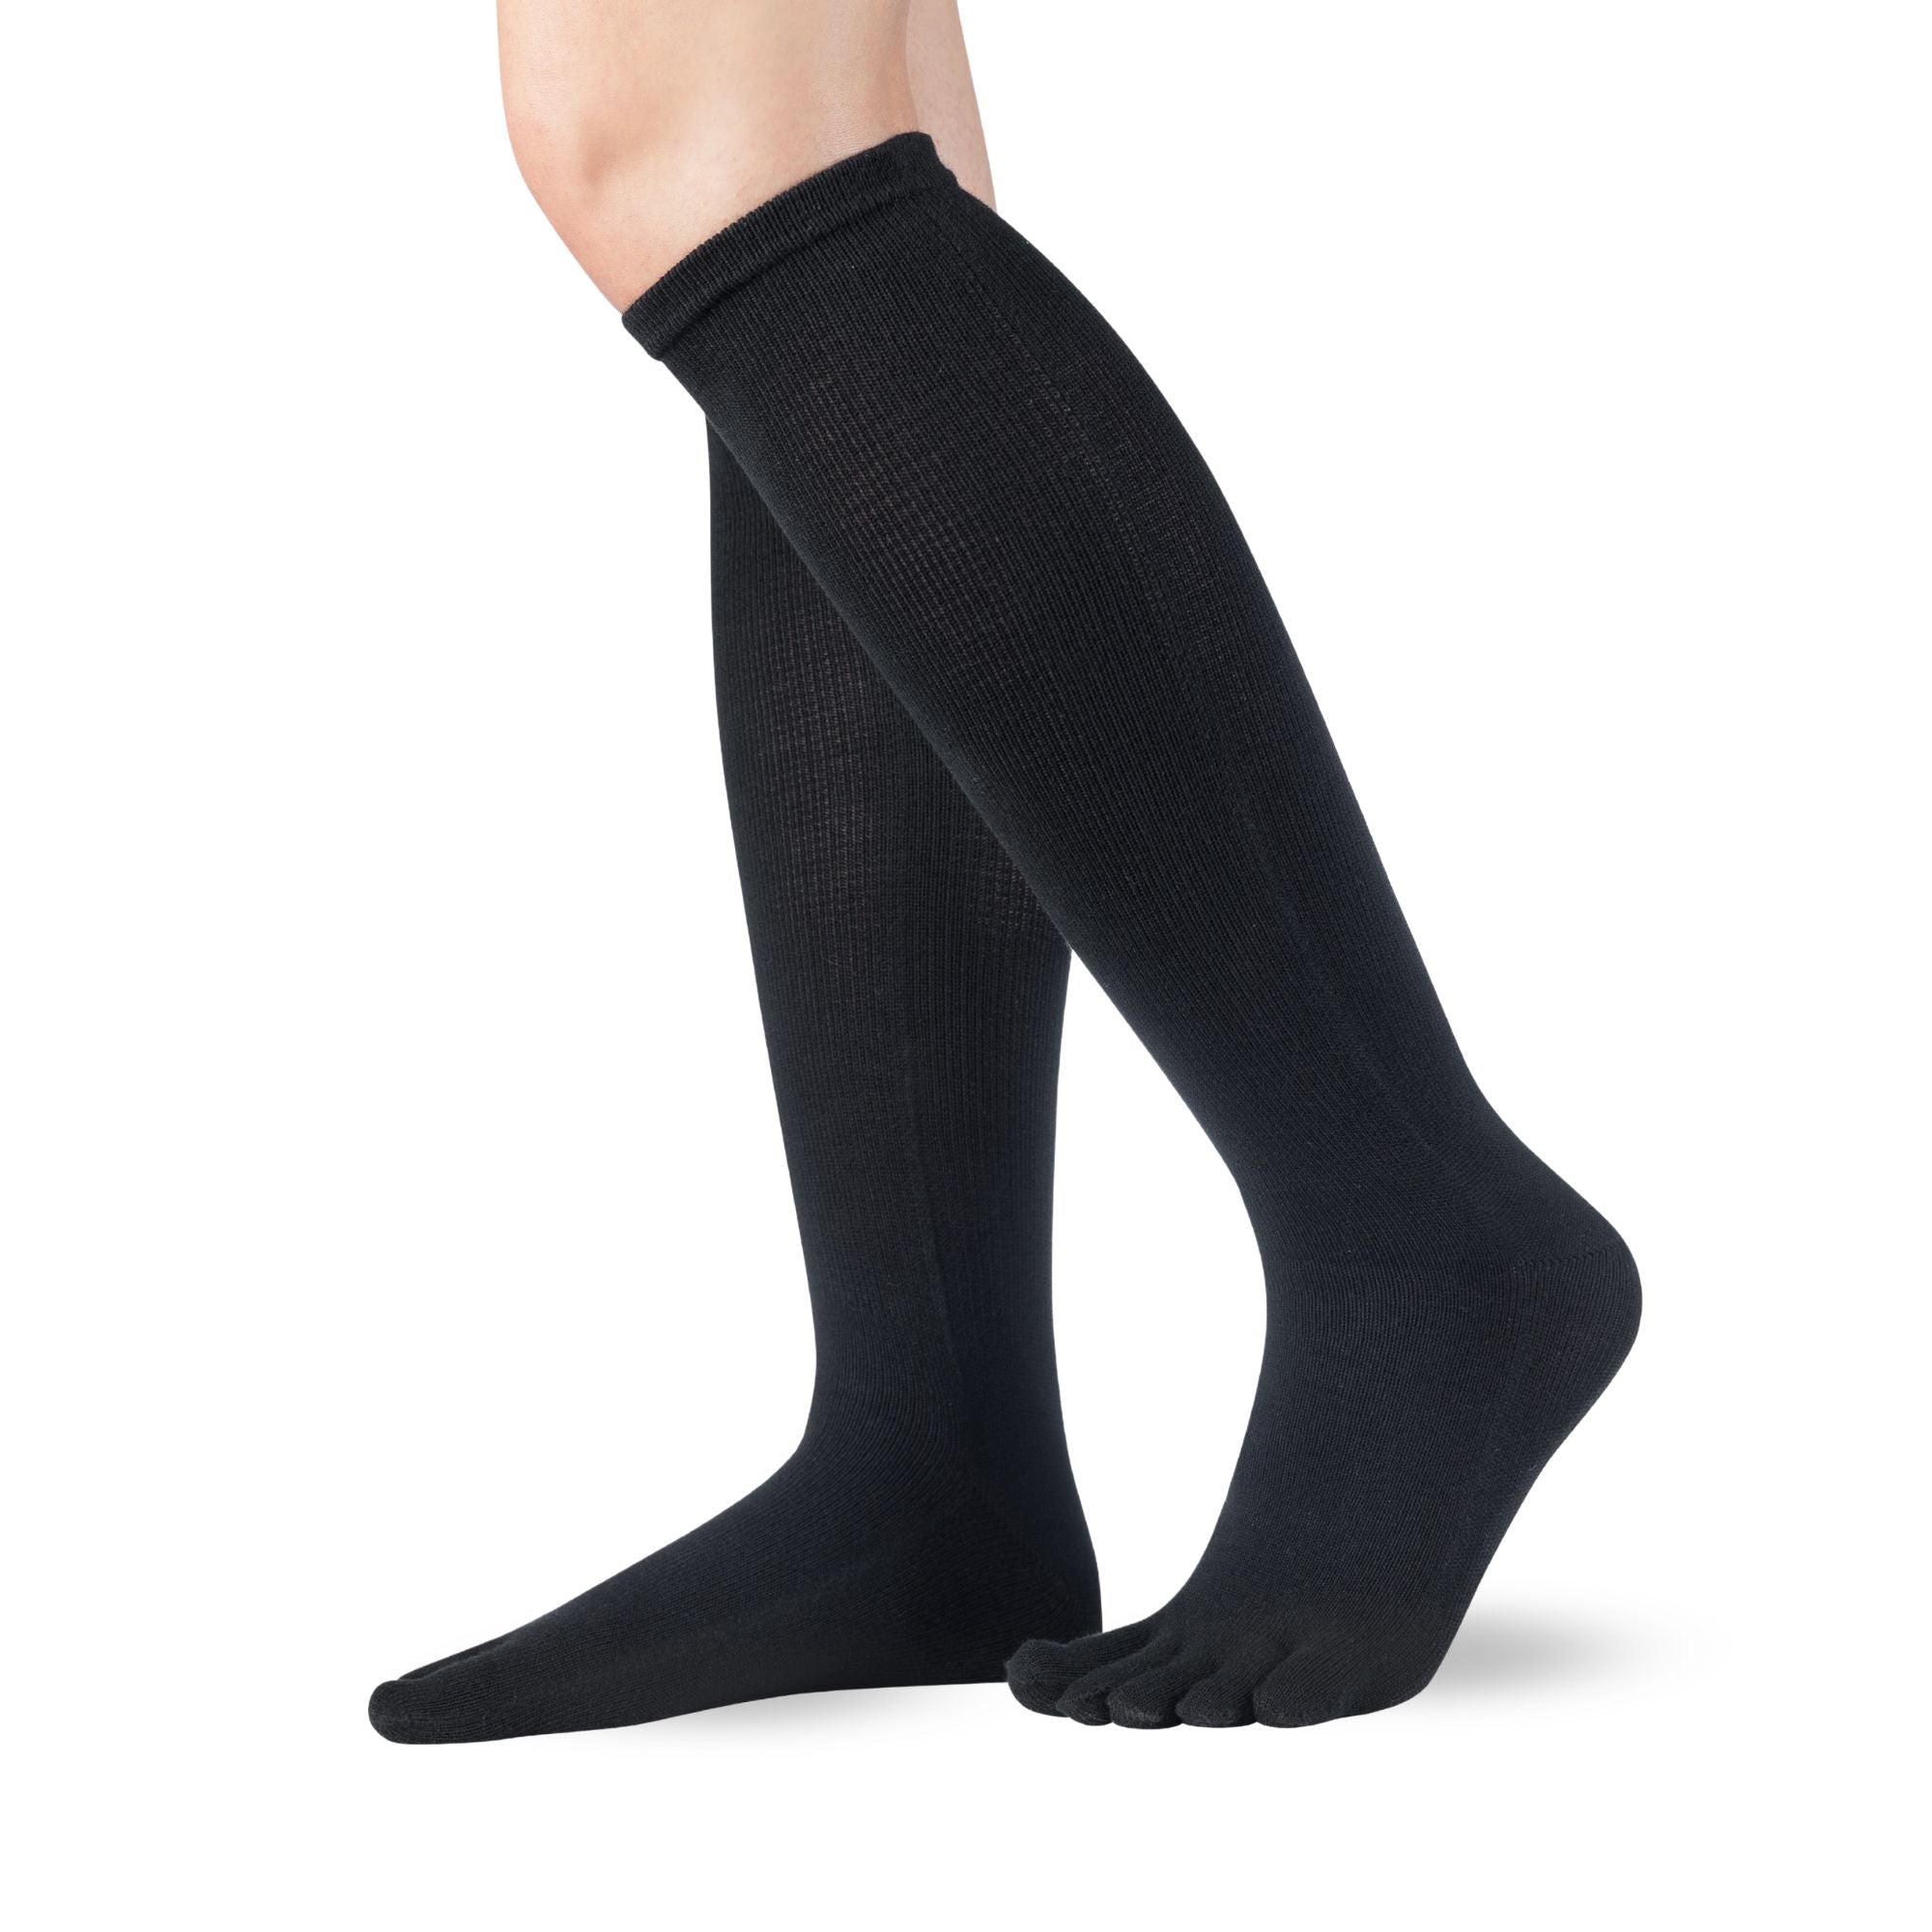 Knitido Essentials toe stockings (cotton) knee-length from the side in black